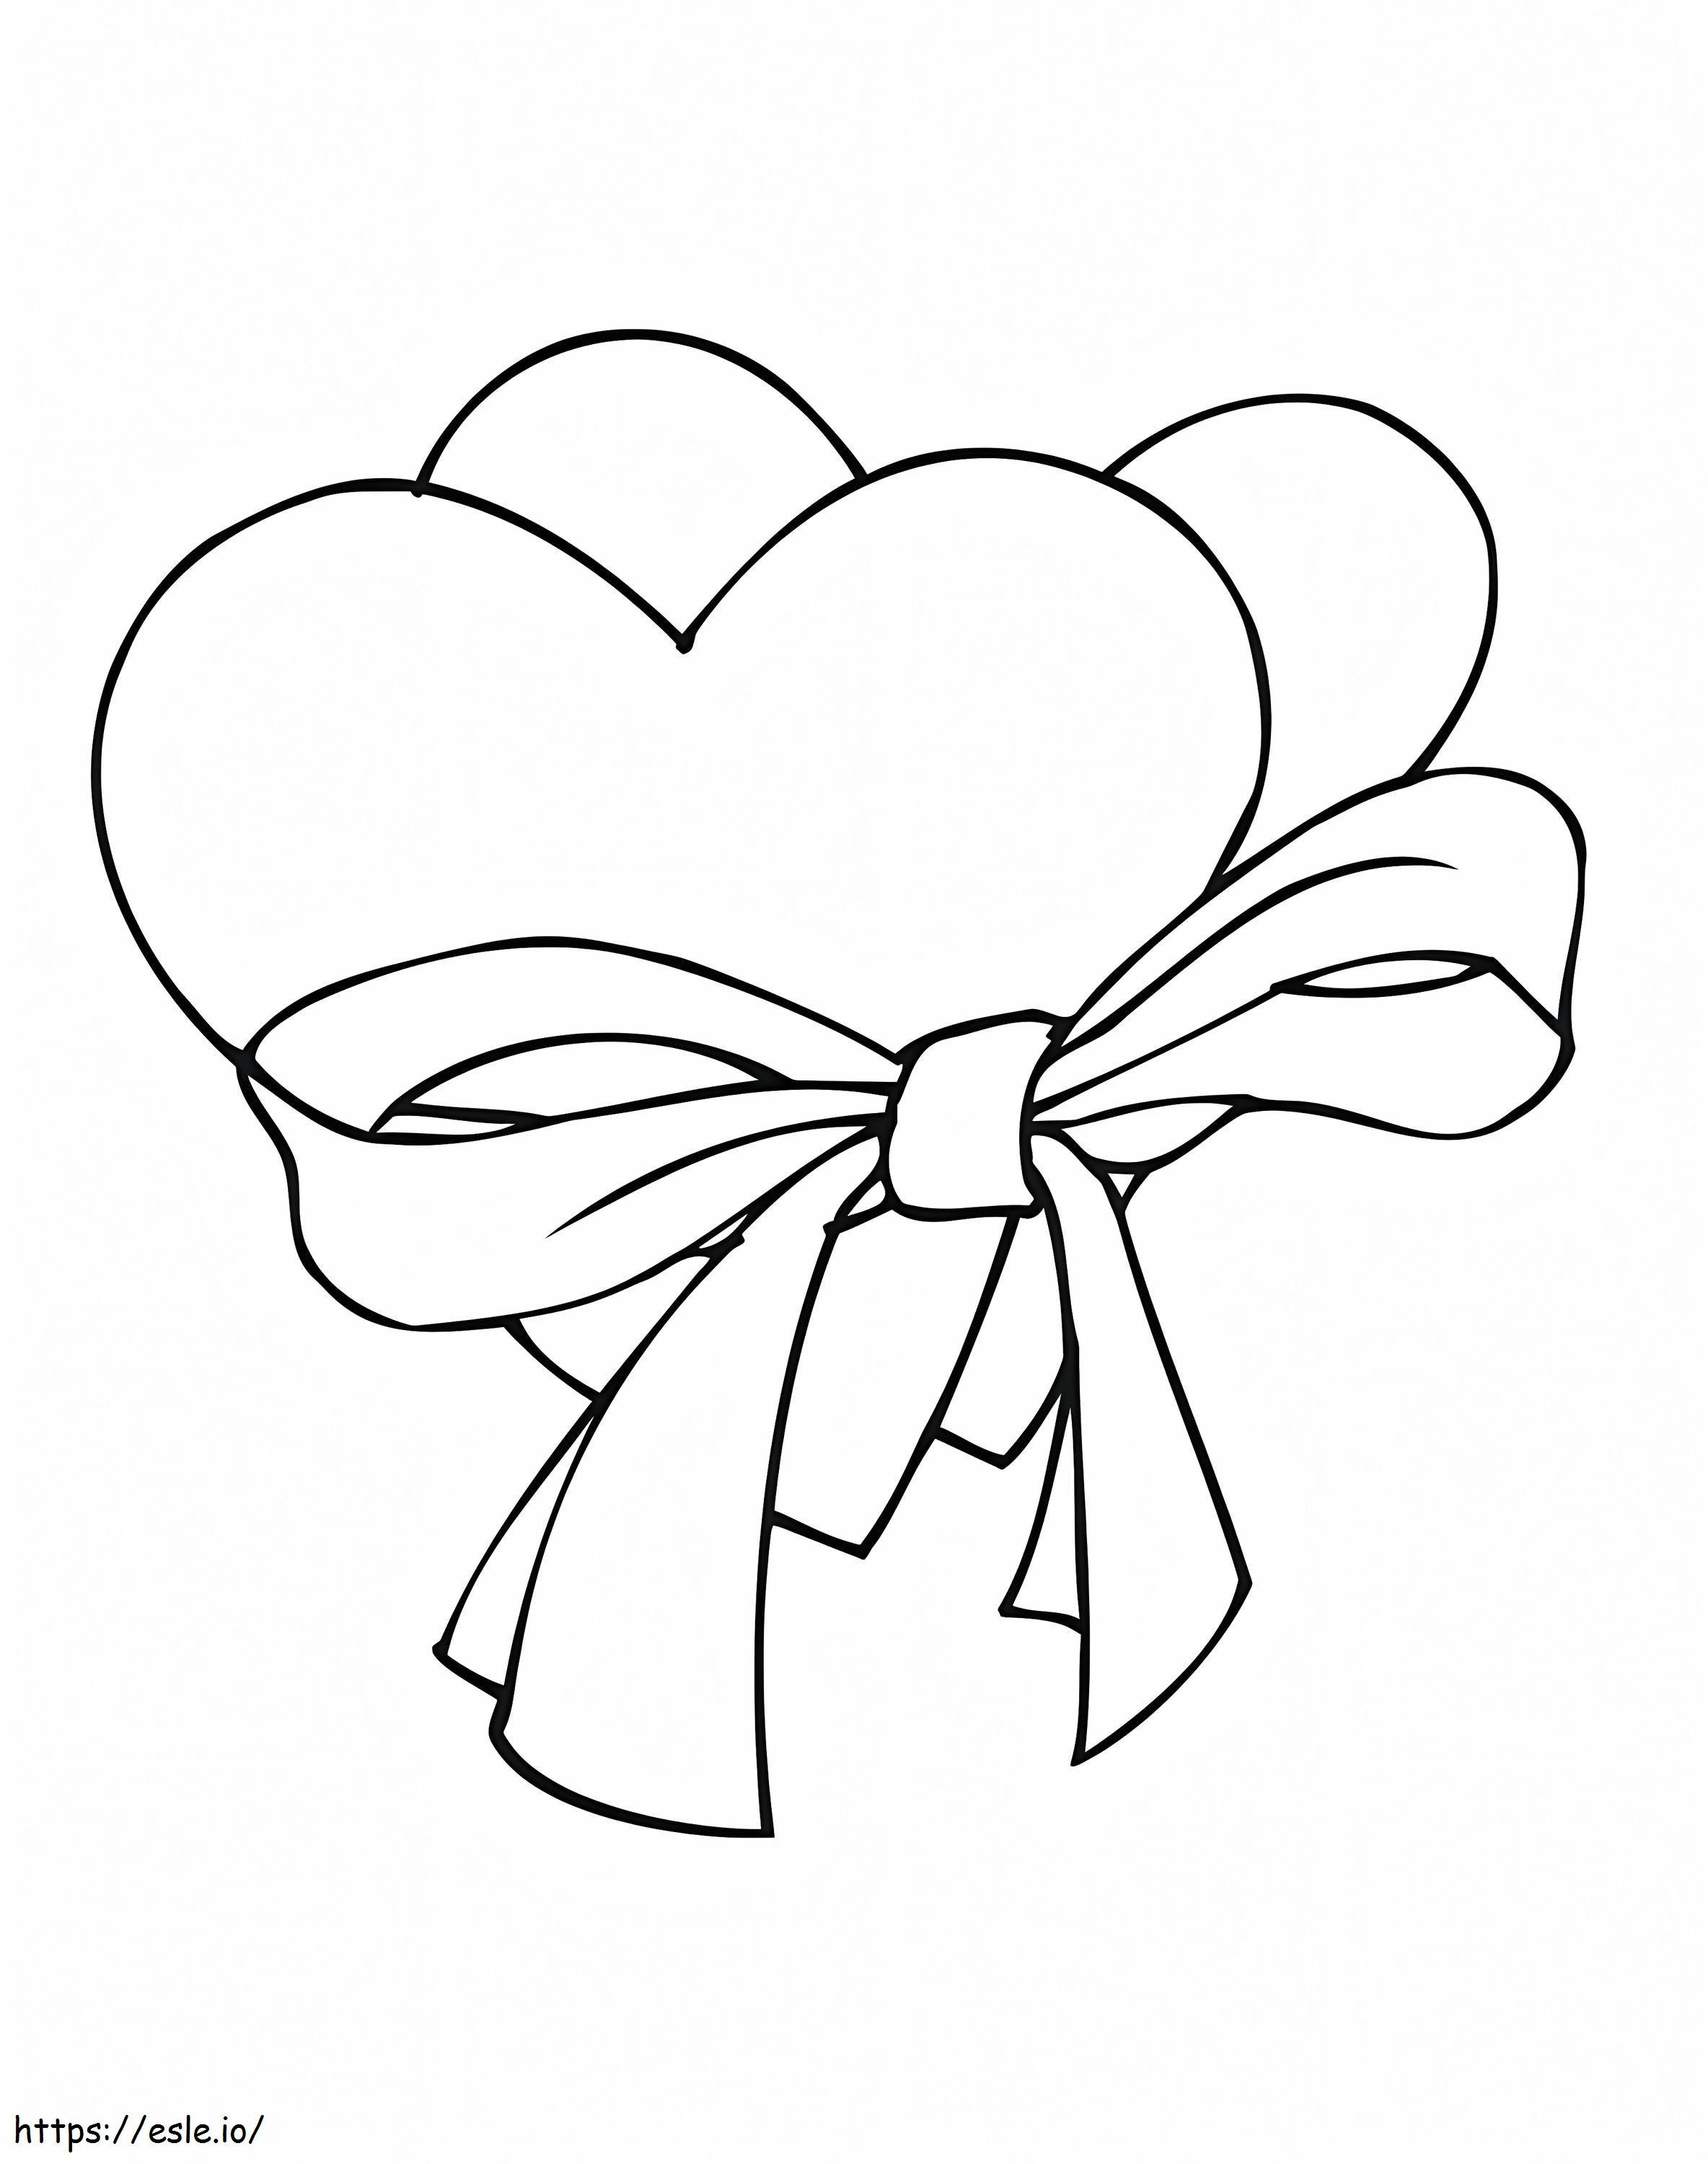 Hearts With Ribbon Bow coloring page